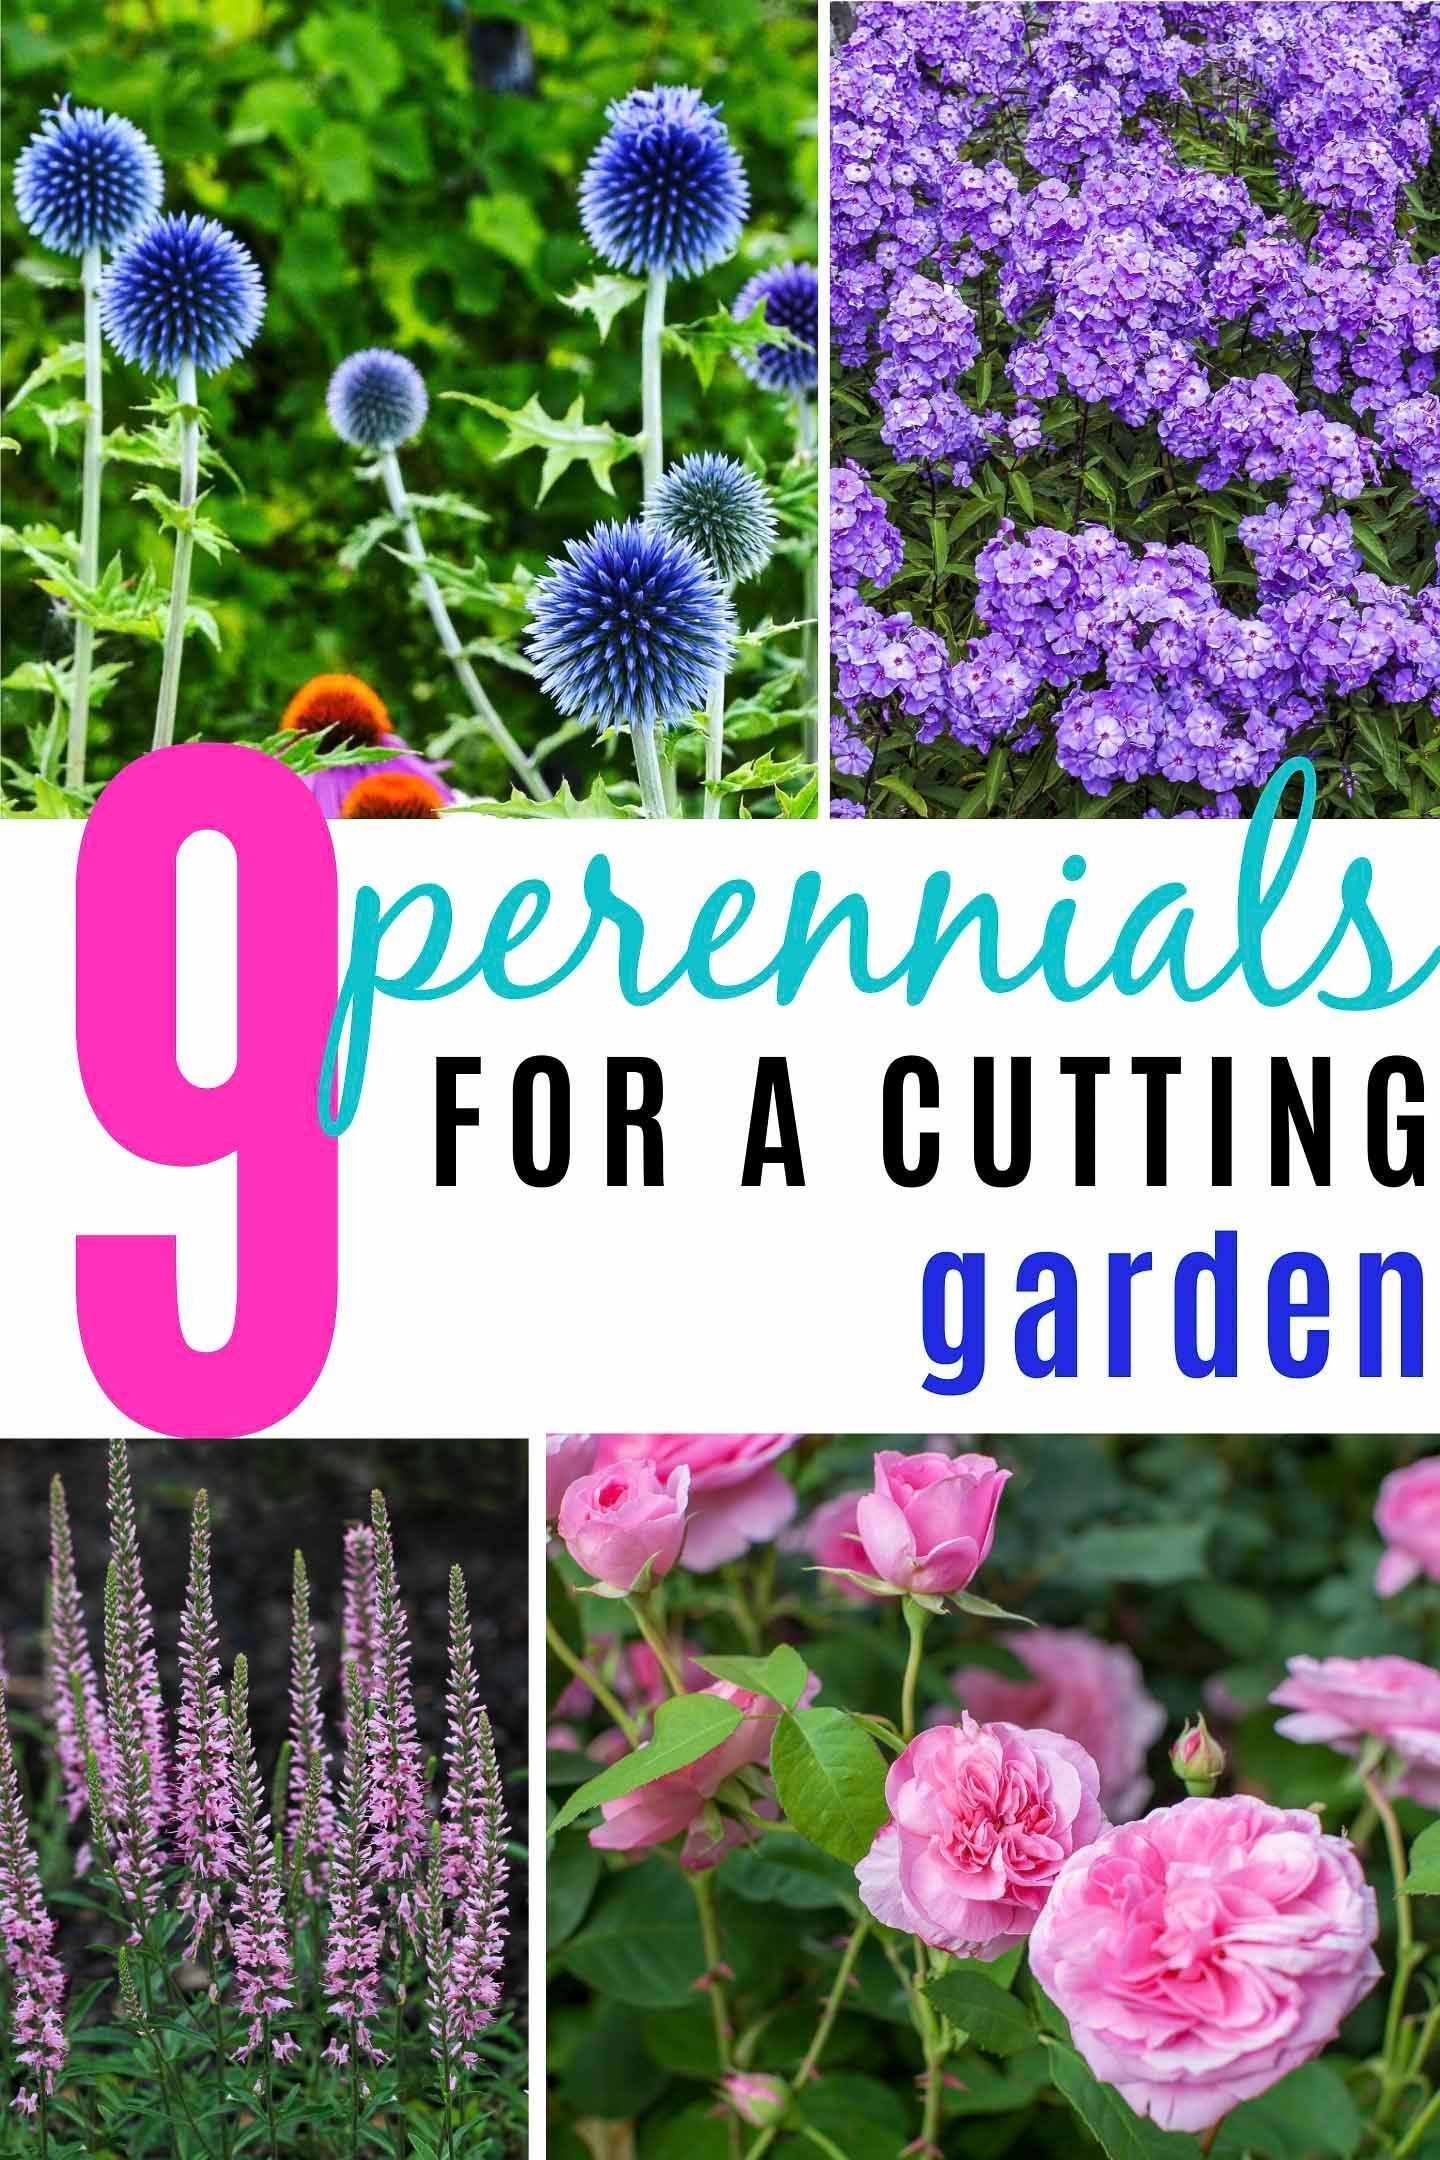 Full Sun Perennials For A Summer Cutting Garden (in zones 4 to 8) - Gardening @ From House To Home -   beauty Flowers garden